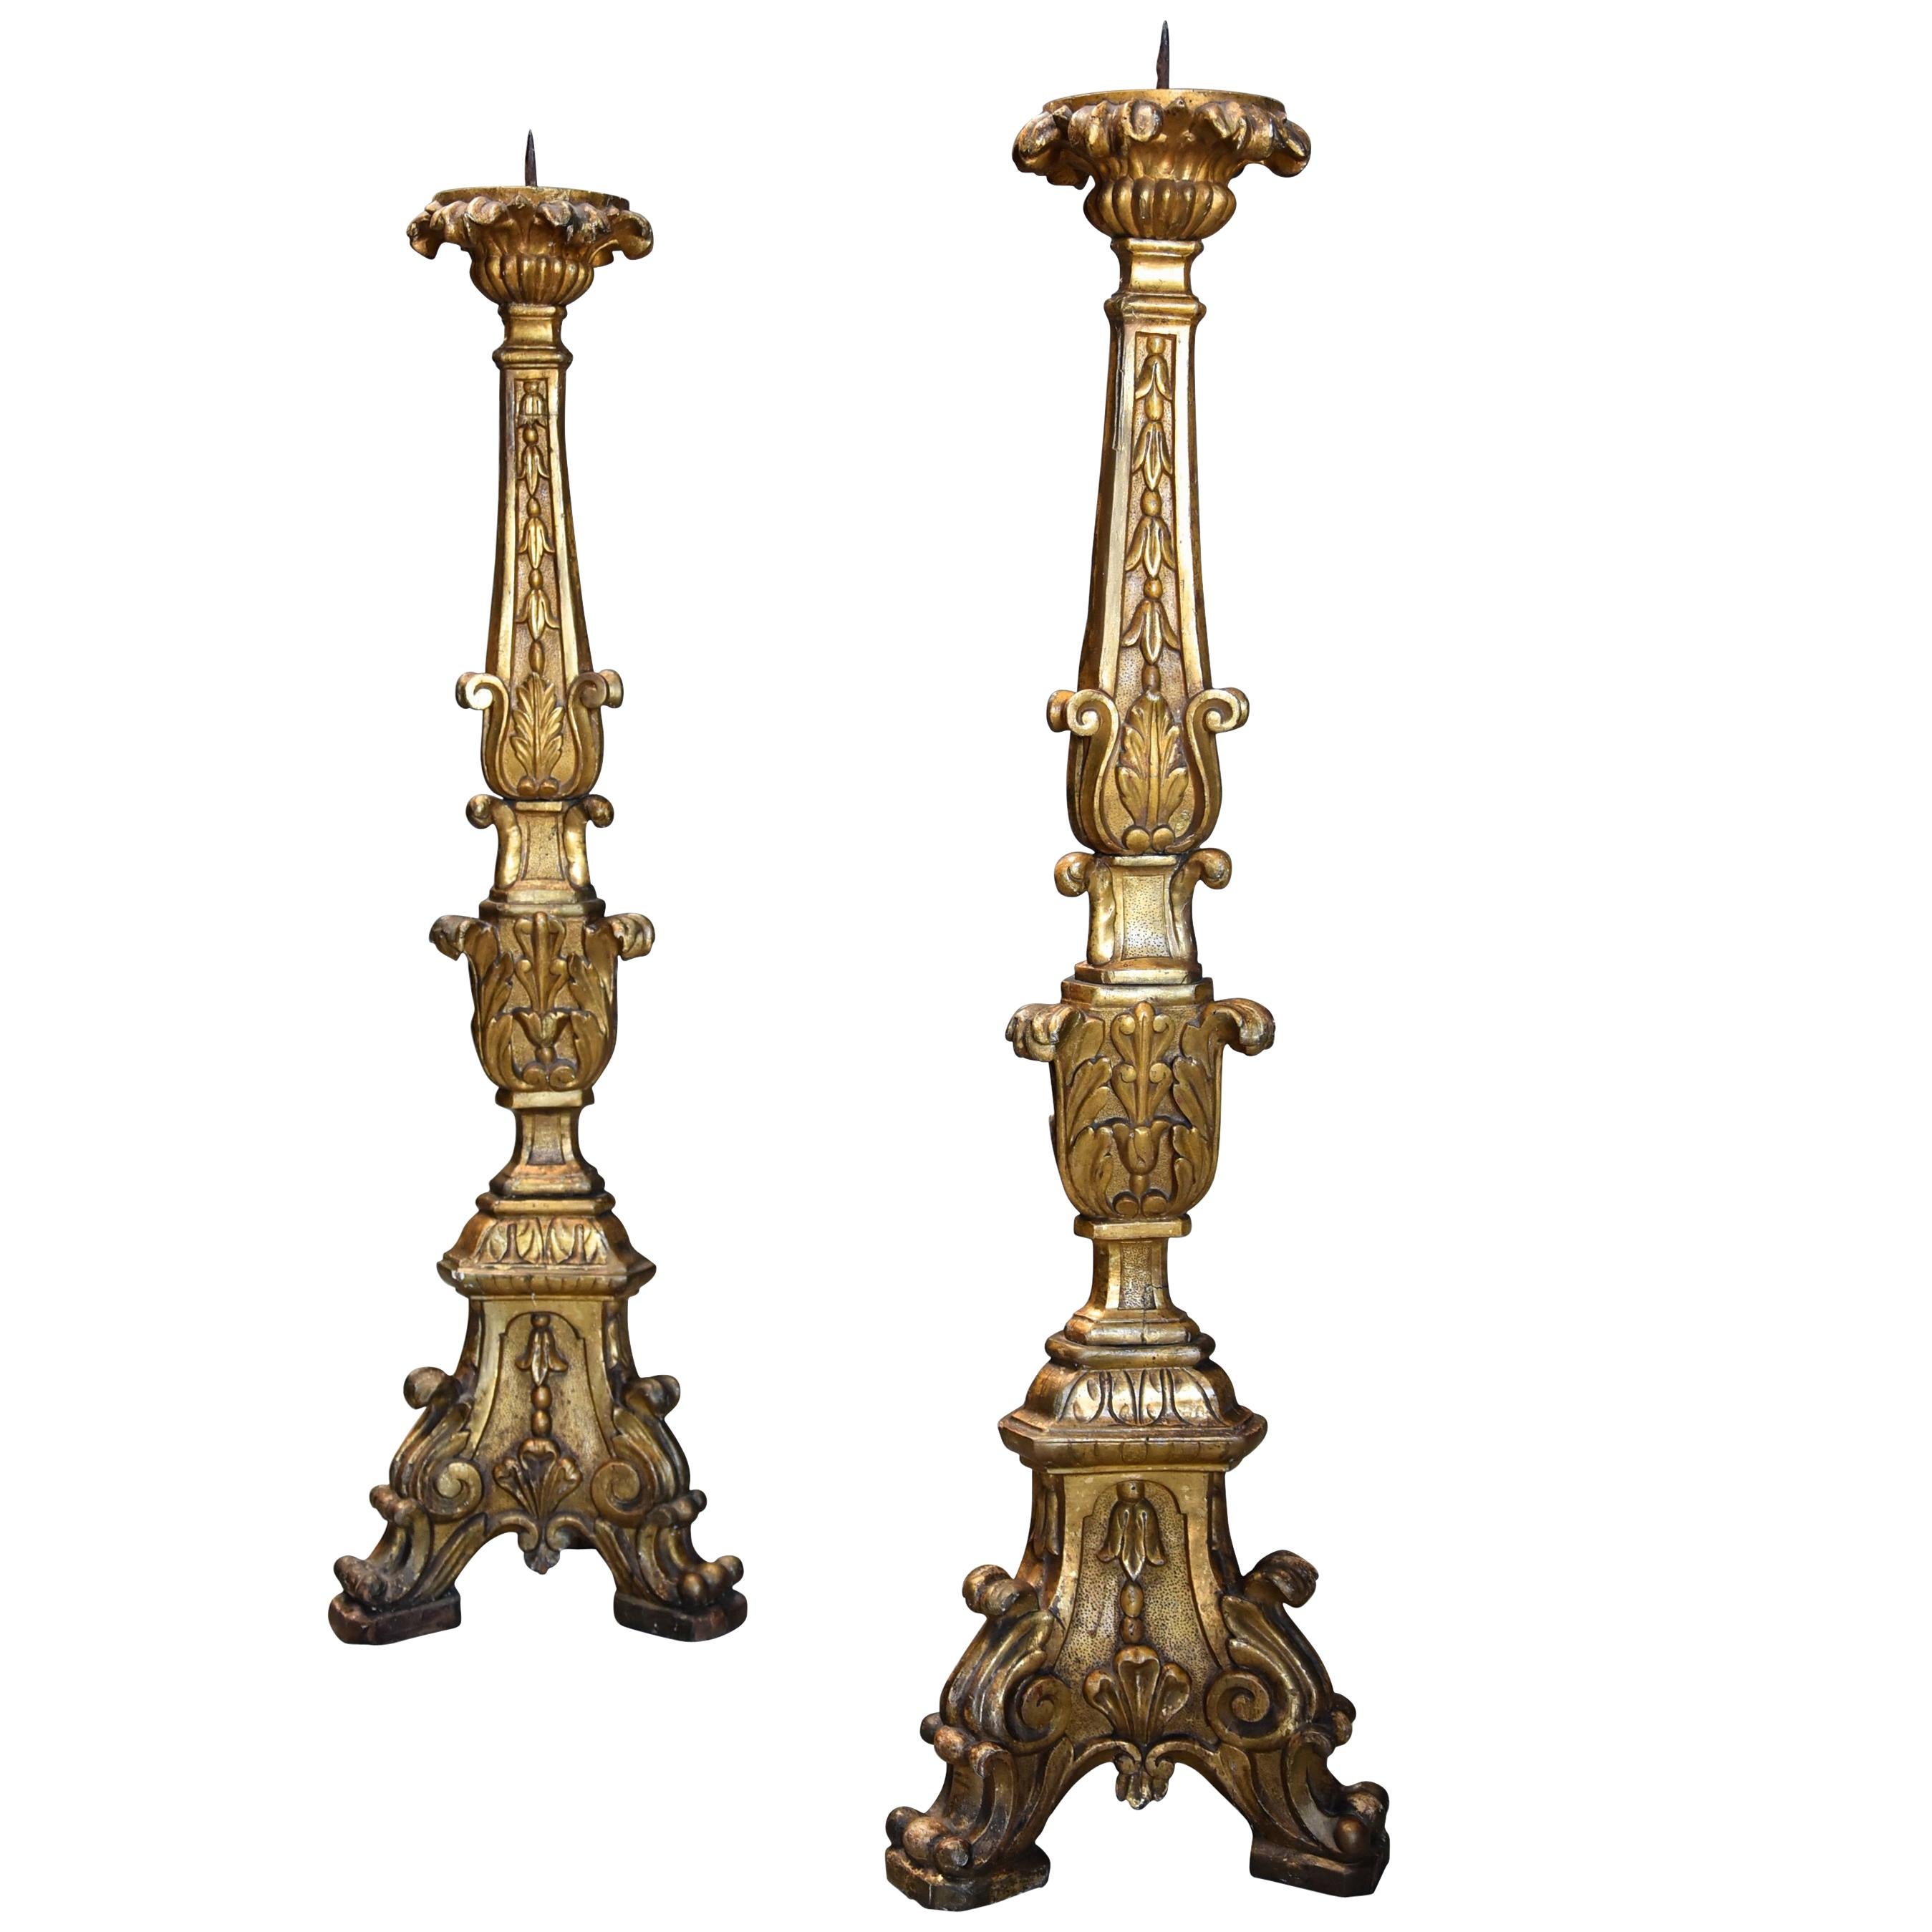 Pair of 18th Century Italian Rococo Carved Wood Gilt and Silver Gilt Prickets For Sale